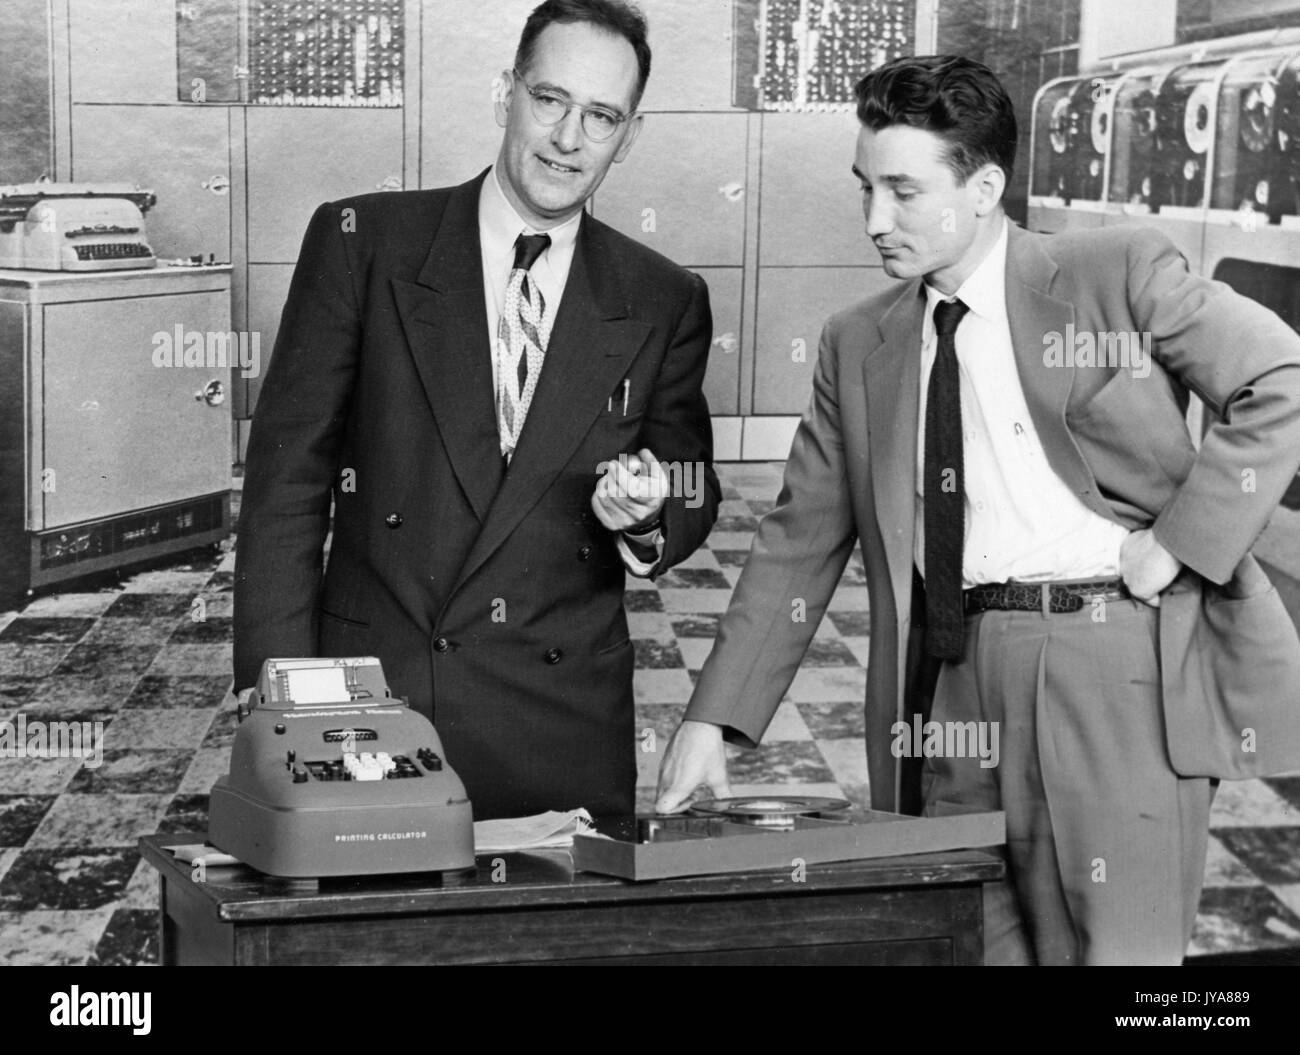 Cast members on set of the Johns Hopkins Science Review television program examining a printing calculator, with a large bank of computers in the background, 1951. Stock Photo